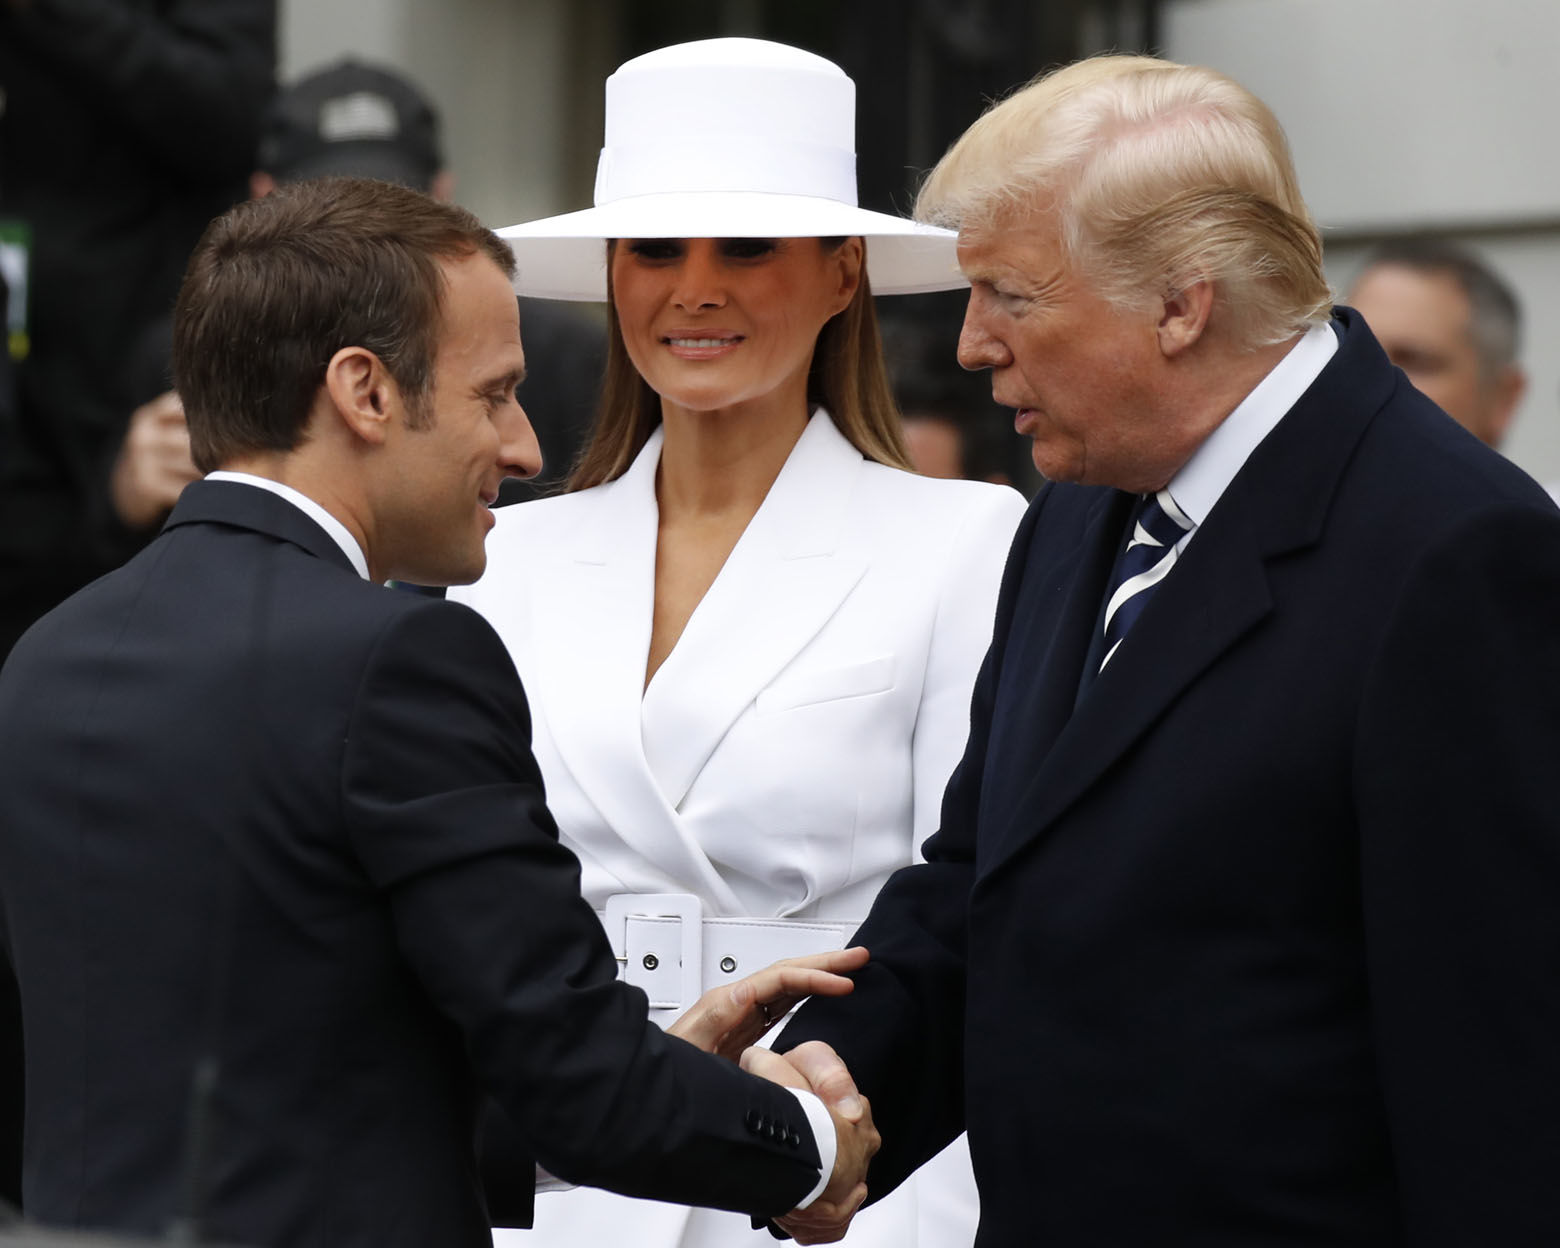 President Donald Trump, right, greets French President Emmanuel Macron as first lady Melania Trump looks on during a State Arrival Ceremony on the South Lawn of the White House in Washington, Tuesday, April 24, 2018. (AP Photo/Carolyn Kaster)